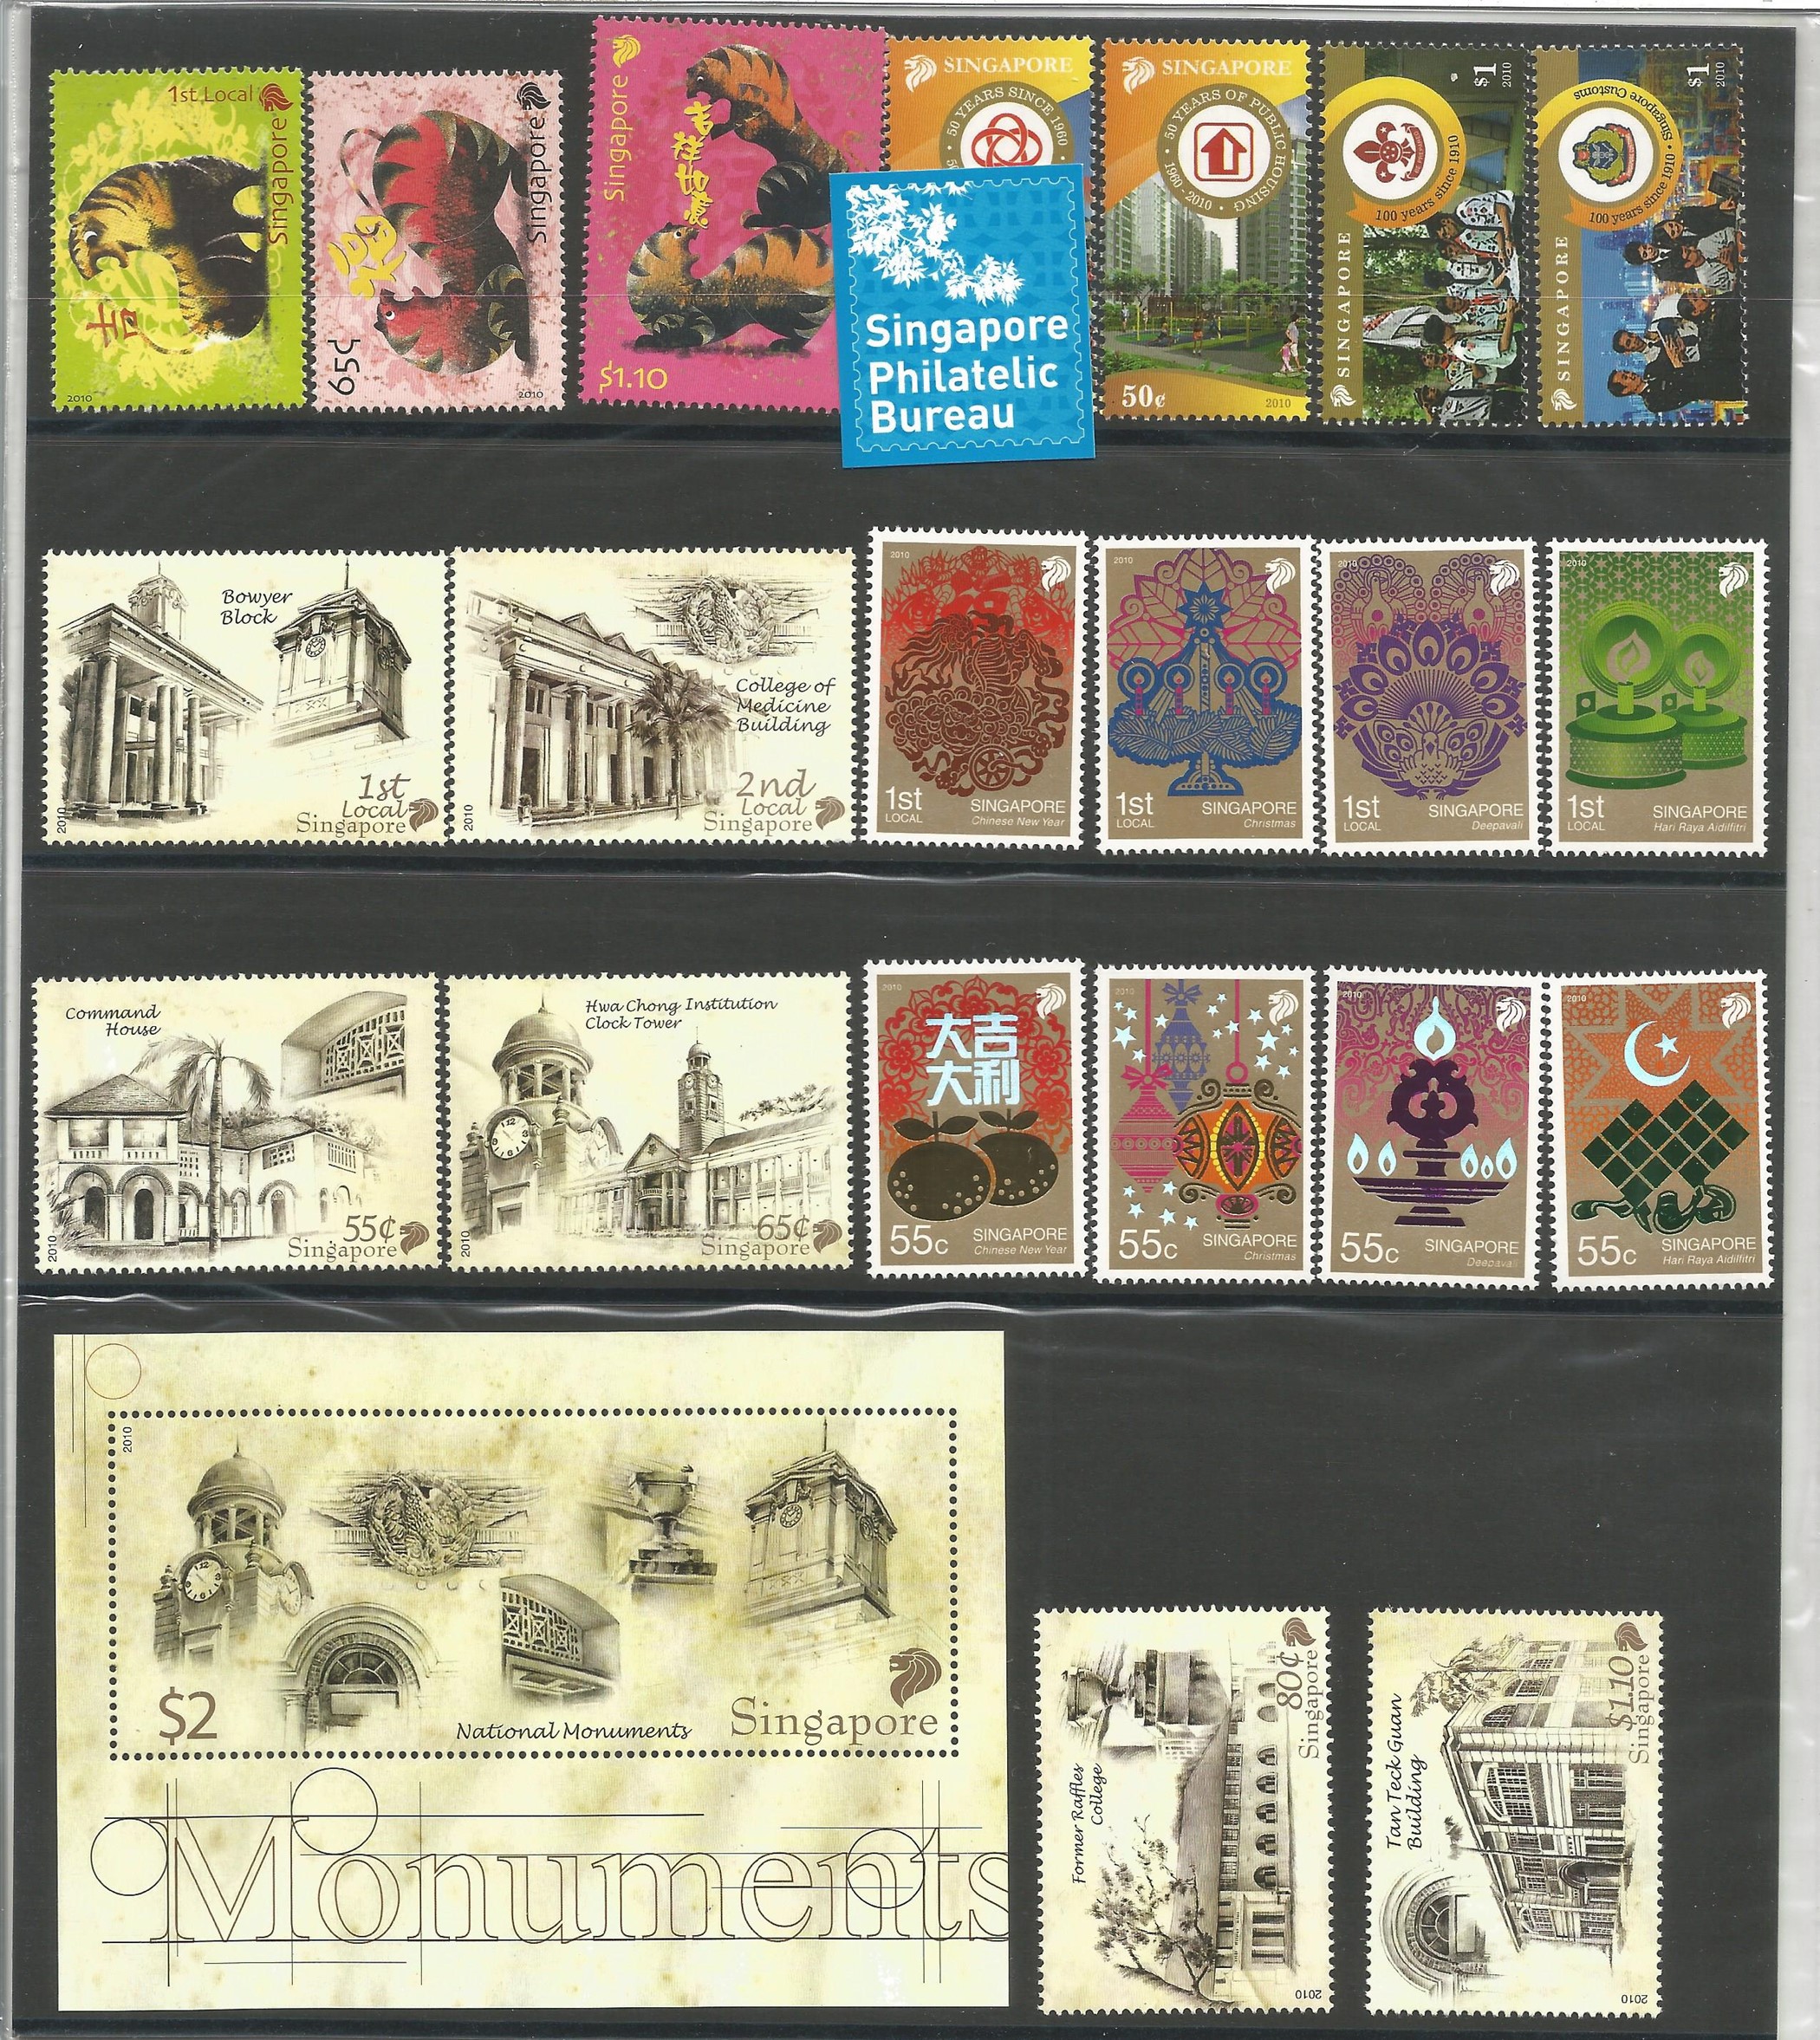 Singapore 2010 presentation book of stamps in slipcase. Unmounted mint stamps. Good condition. We